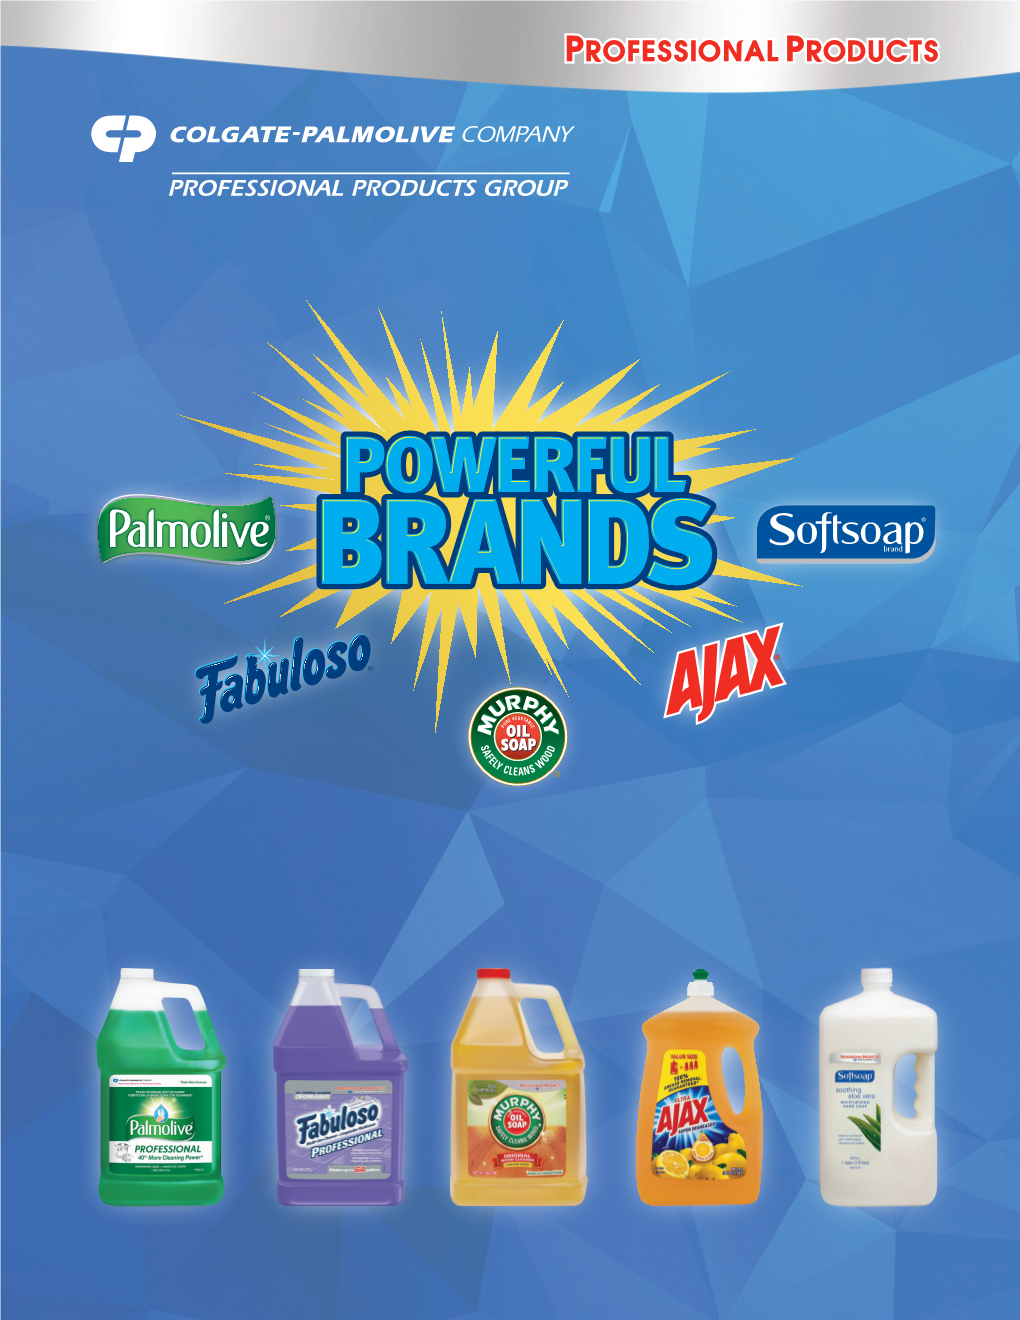 Oil Soap 7 Cleaners and Wood Cleaners, Liquid Soaps SOFTSOAP® Brand Liquid Hand Soaps 8-9 and More, Look to Colgate-Palmolive for Bar Soaps 10 Brands You Can Rely On